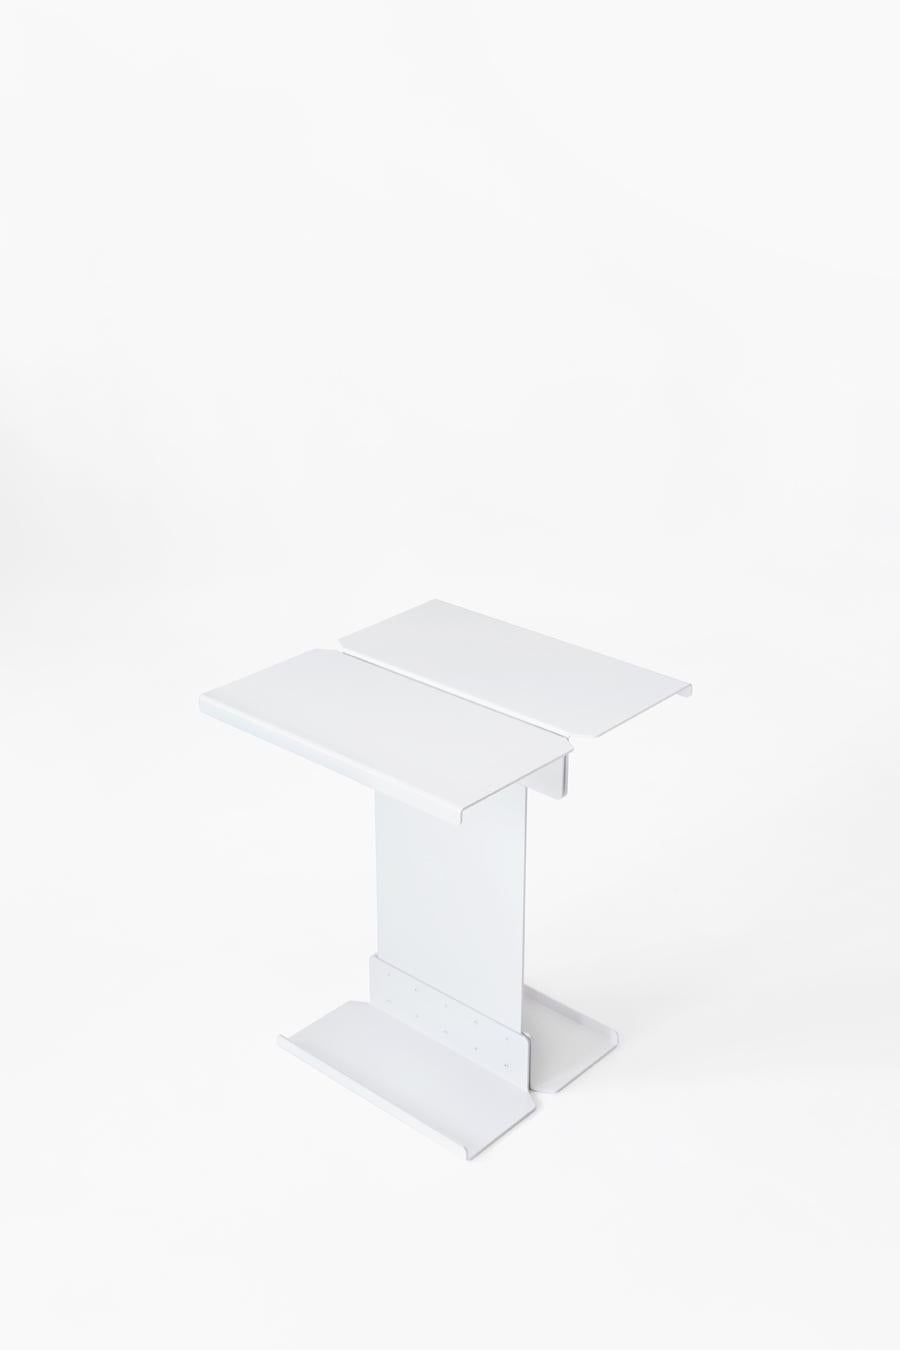 Five is a side table made in iron sheet and aluminum, and finished in matte paint. It’s a rational and futuristic design; it consists of five pieces joined together with rivets that give the table an industrial feel. This design reflects on how